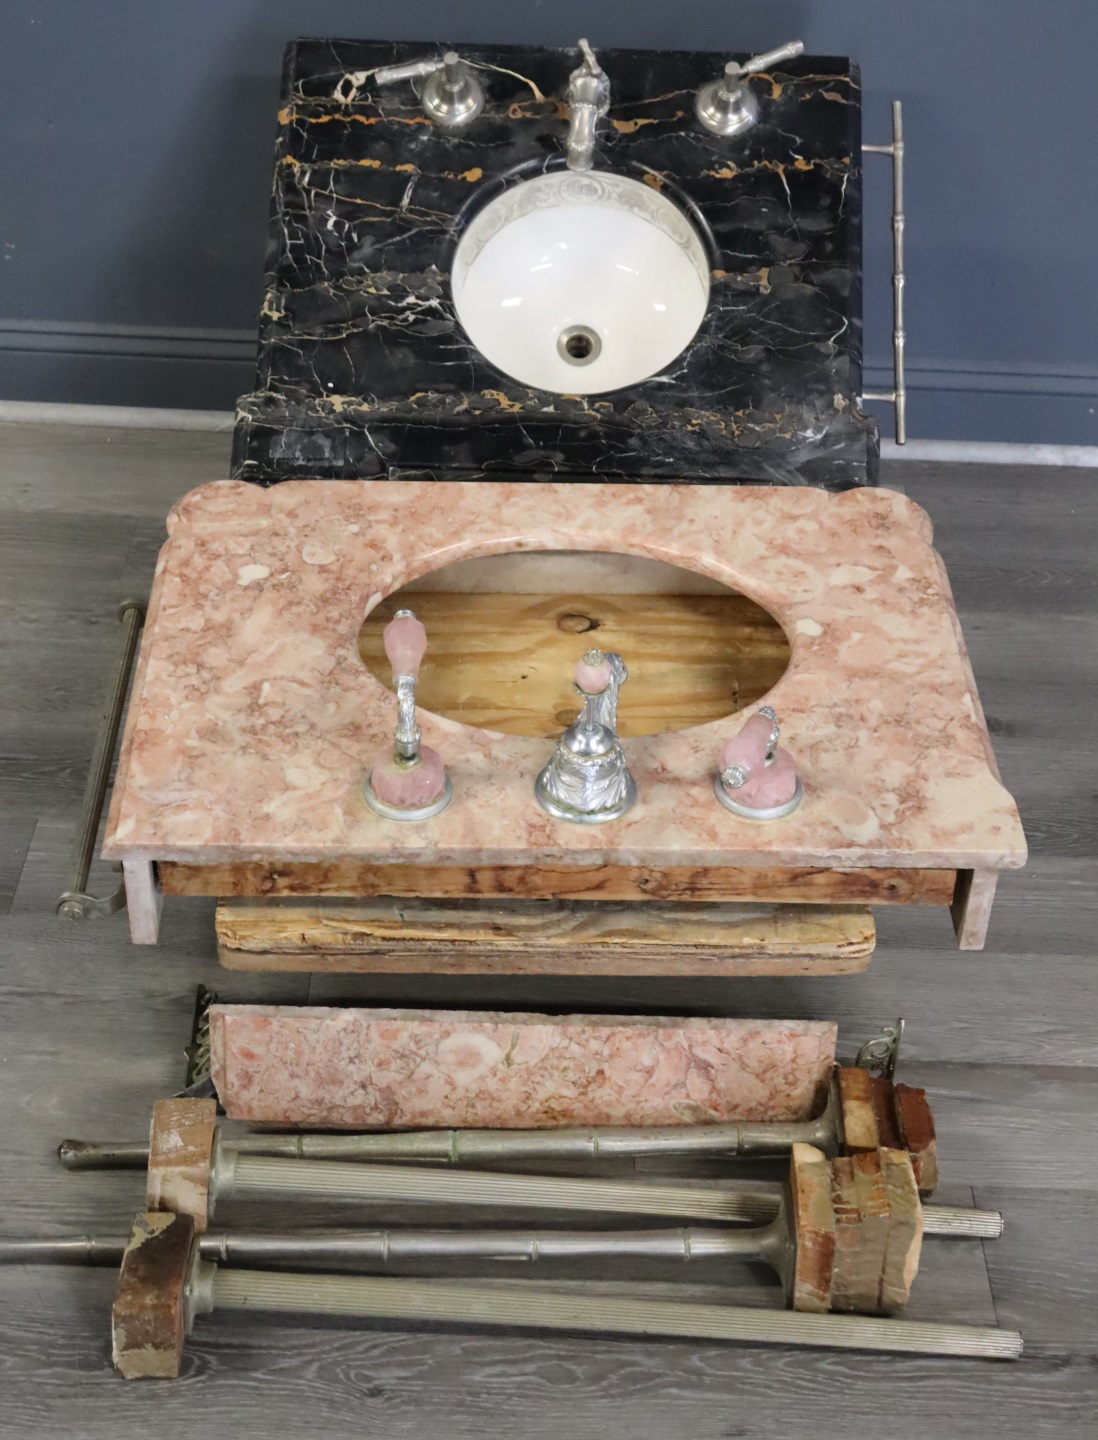 2 SHERYL WAGNER MARBLE SINKS From 3be285